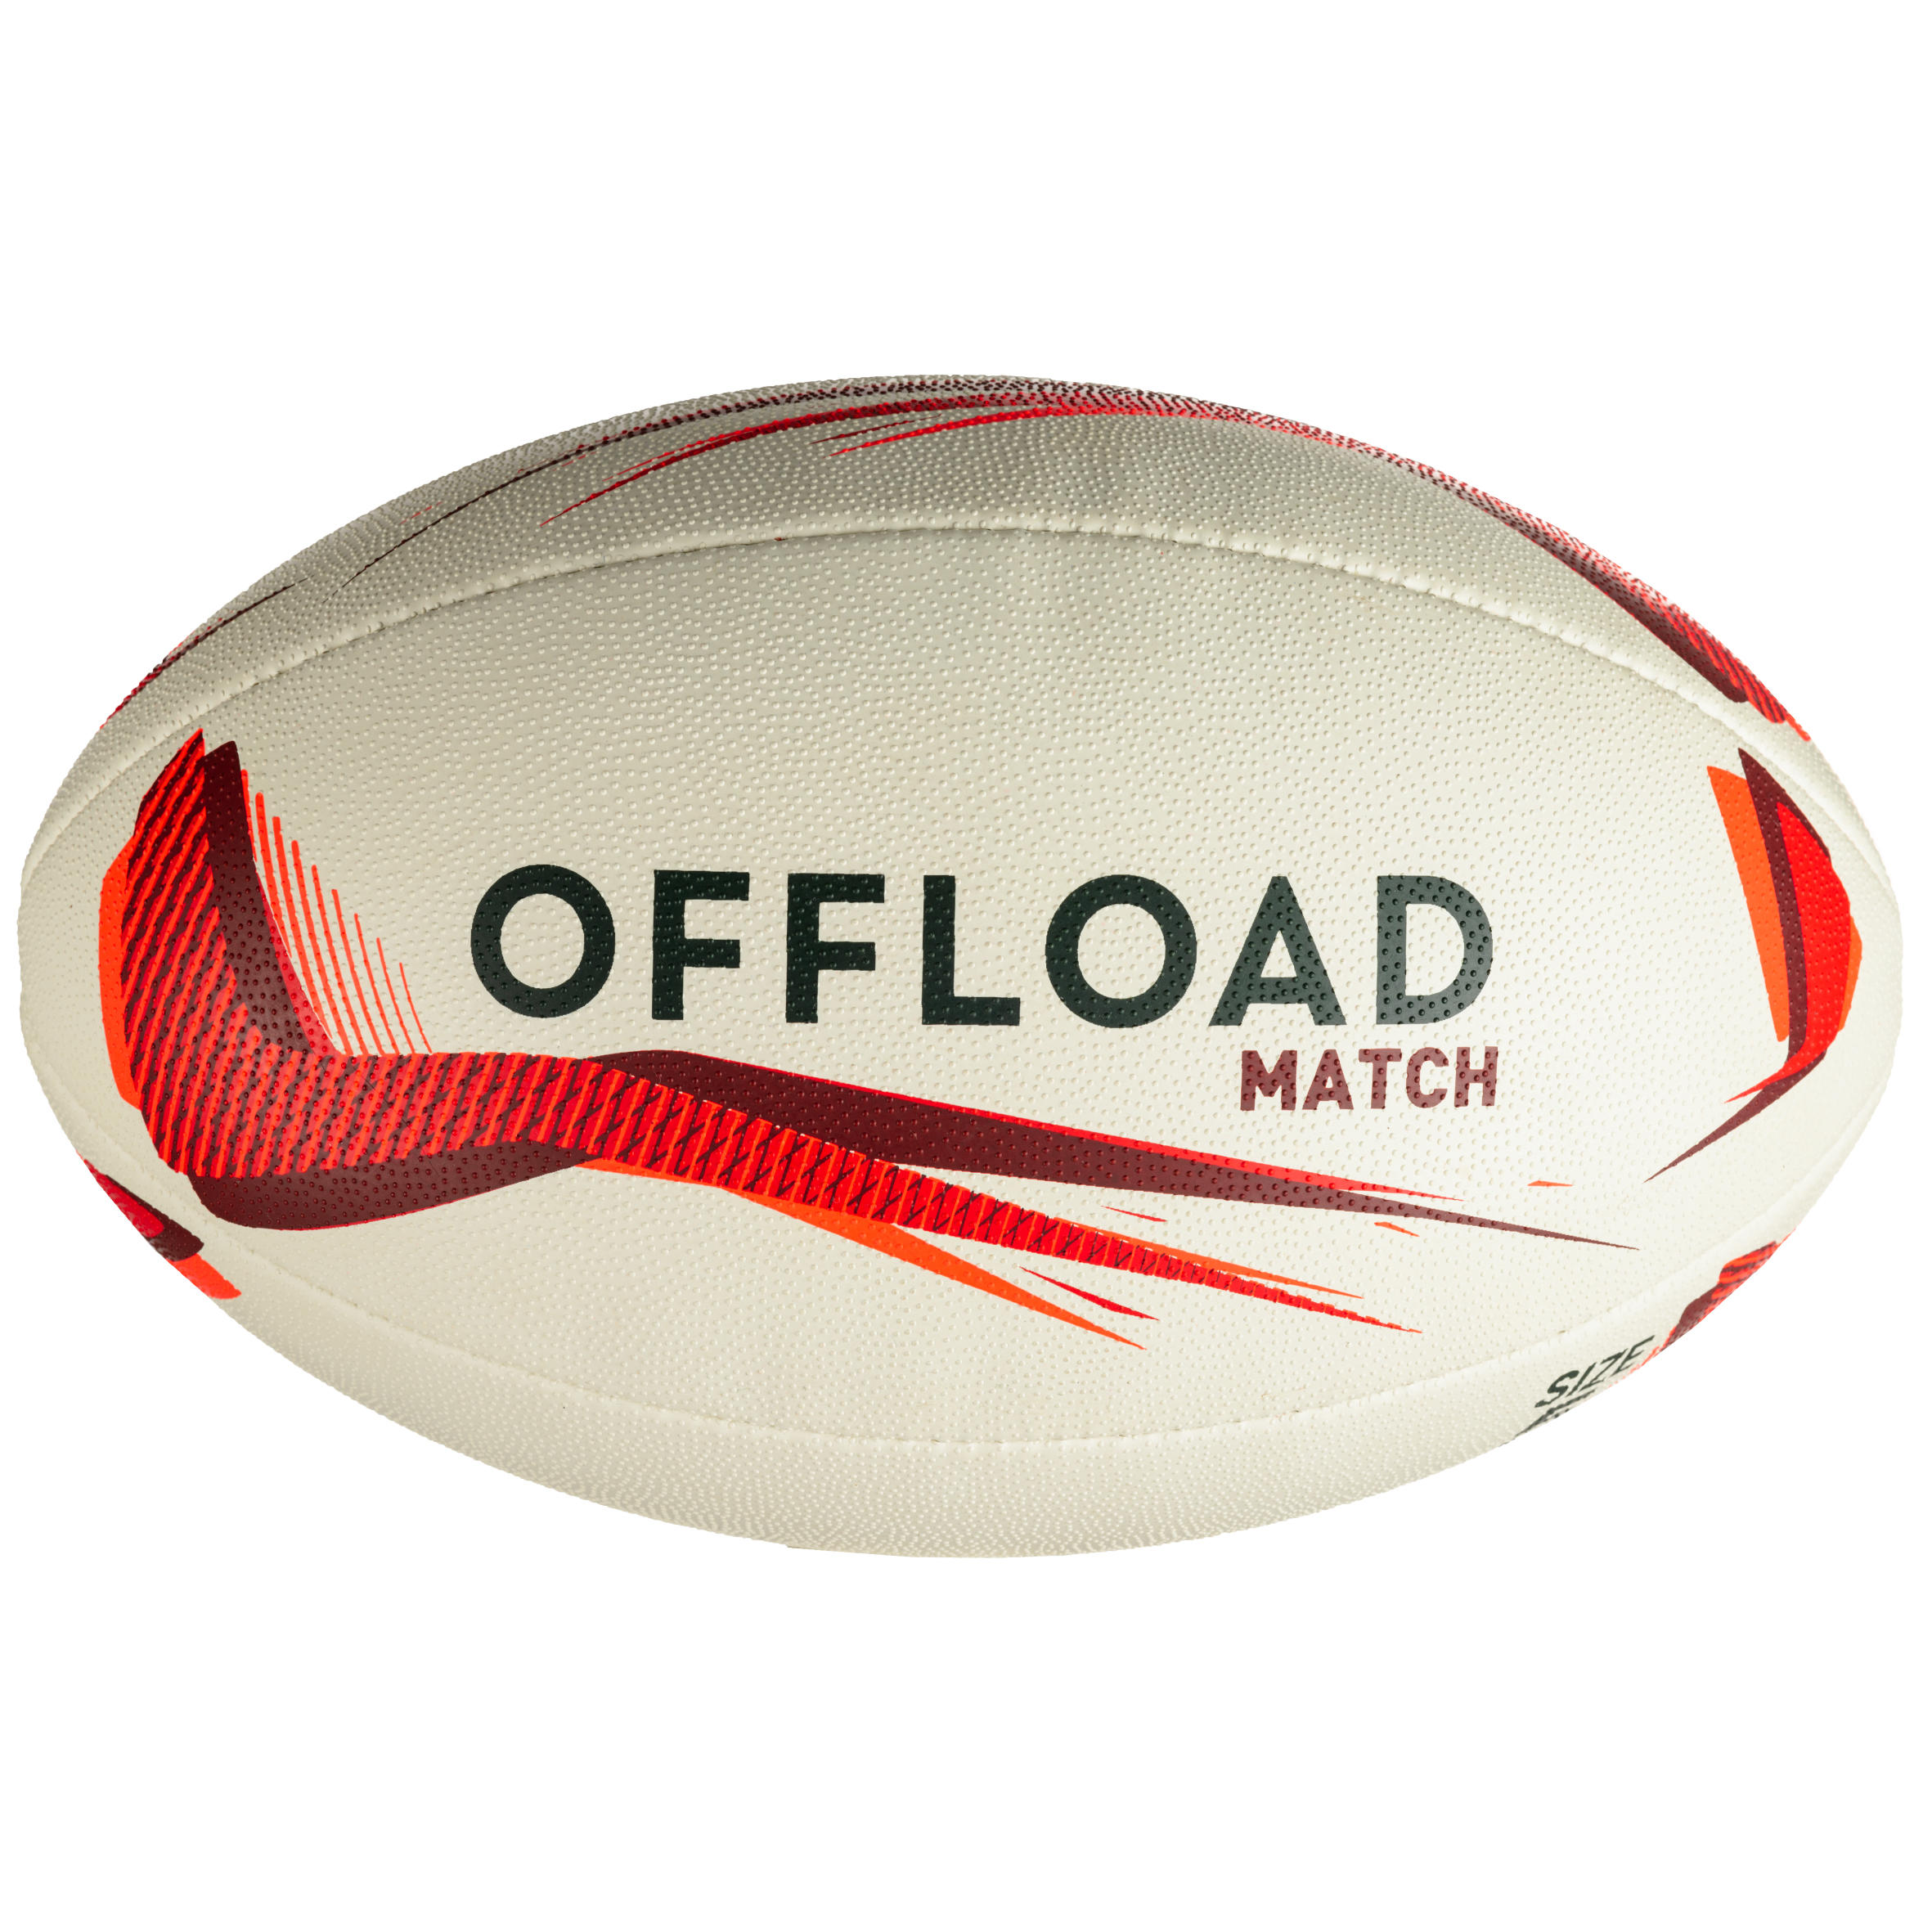 Rugby Balls And Accessories - Decathlon